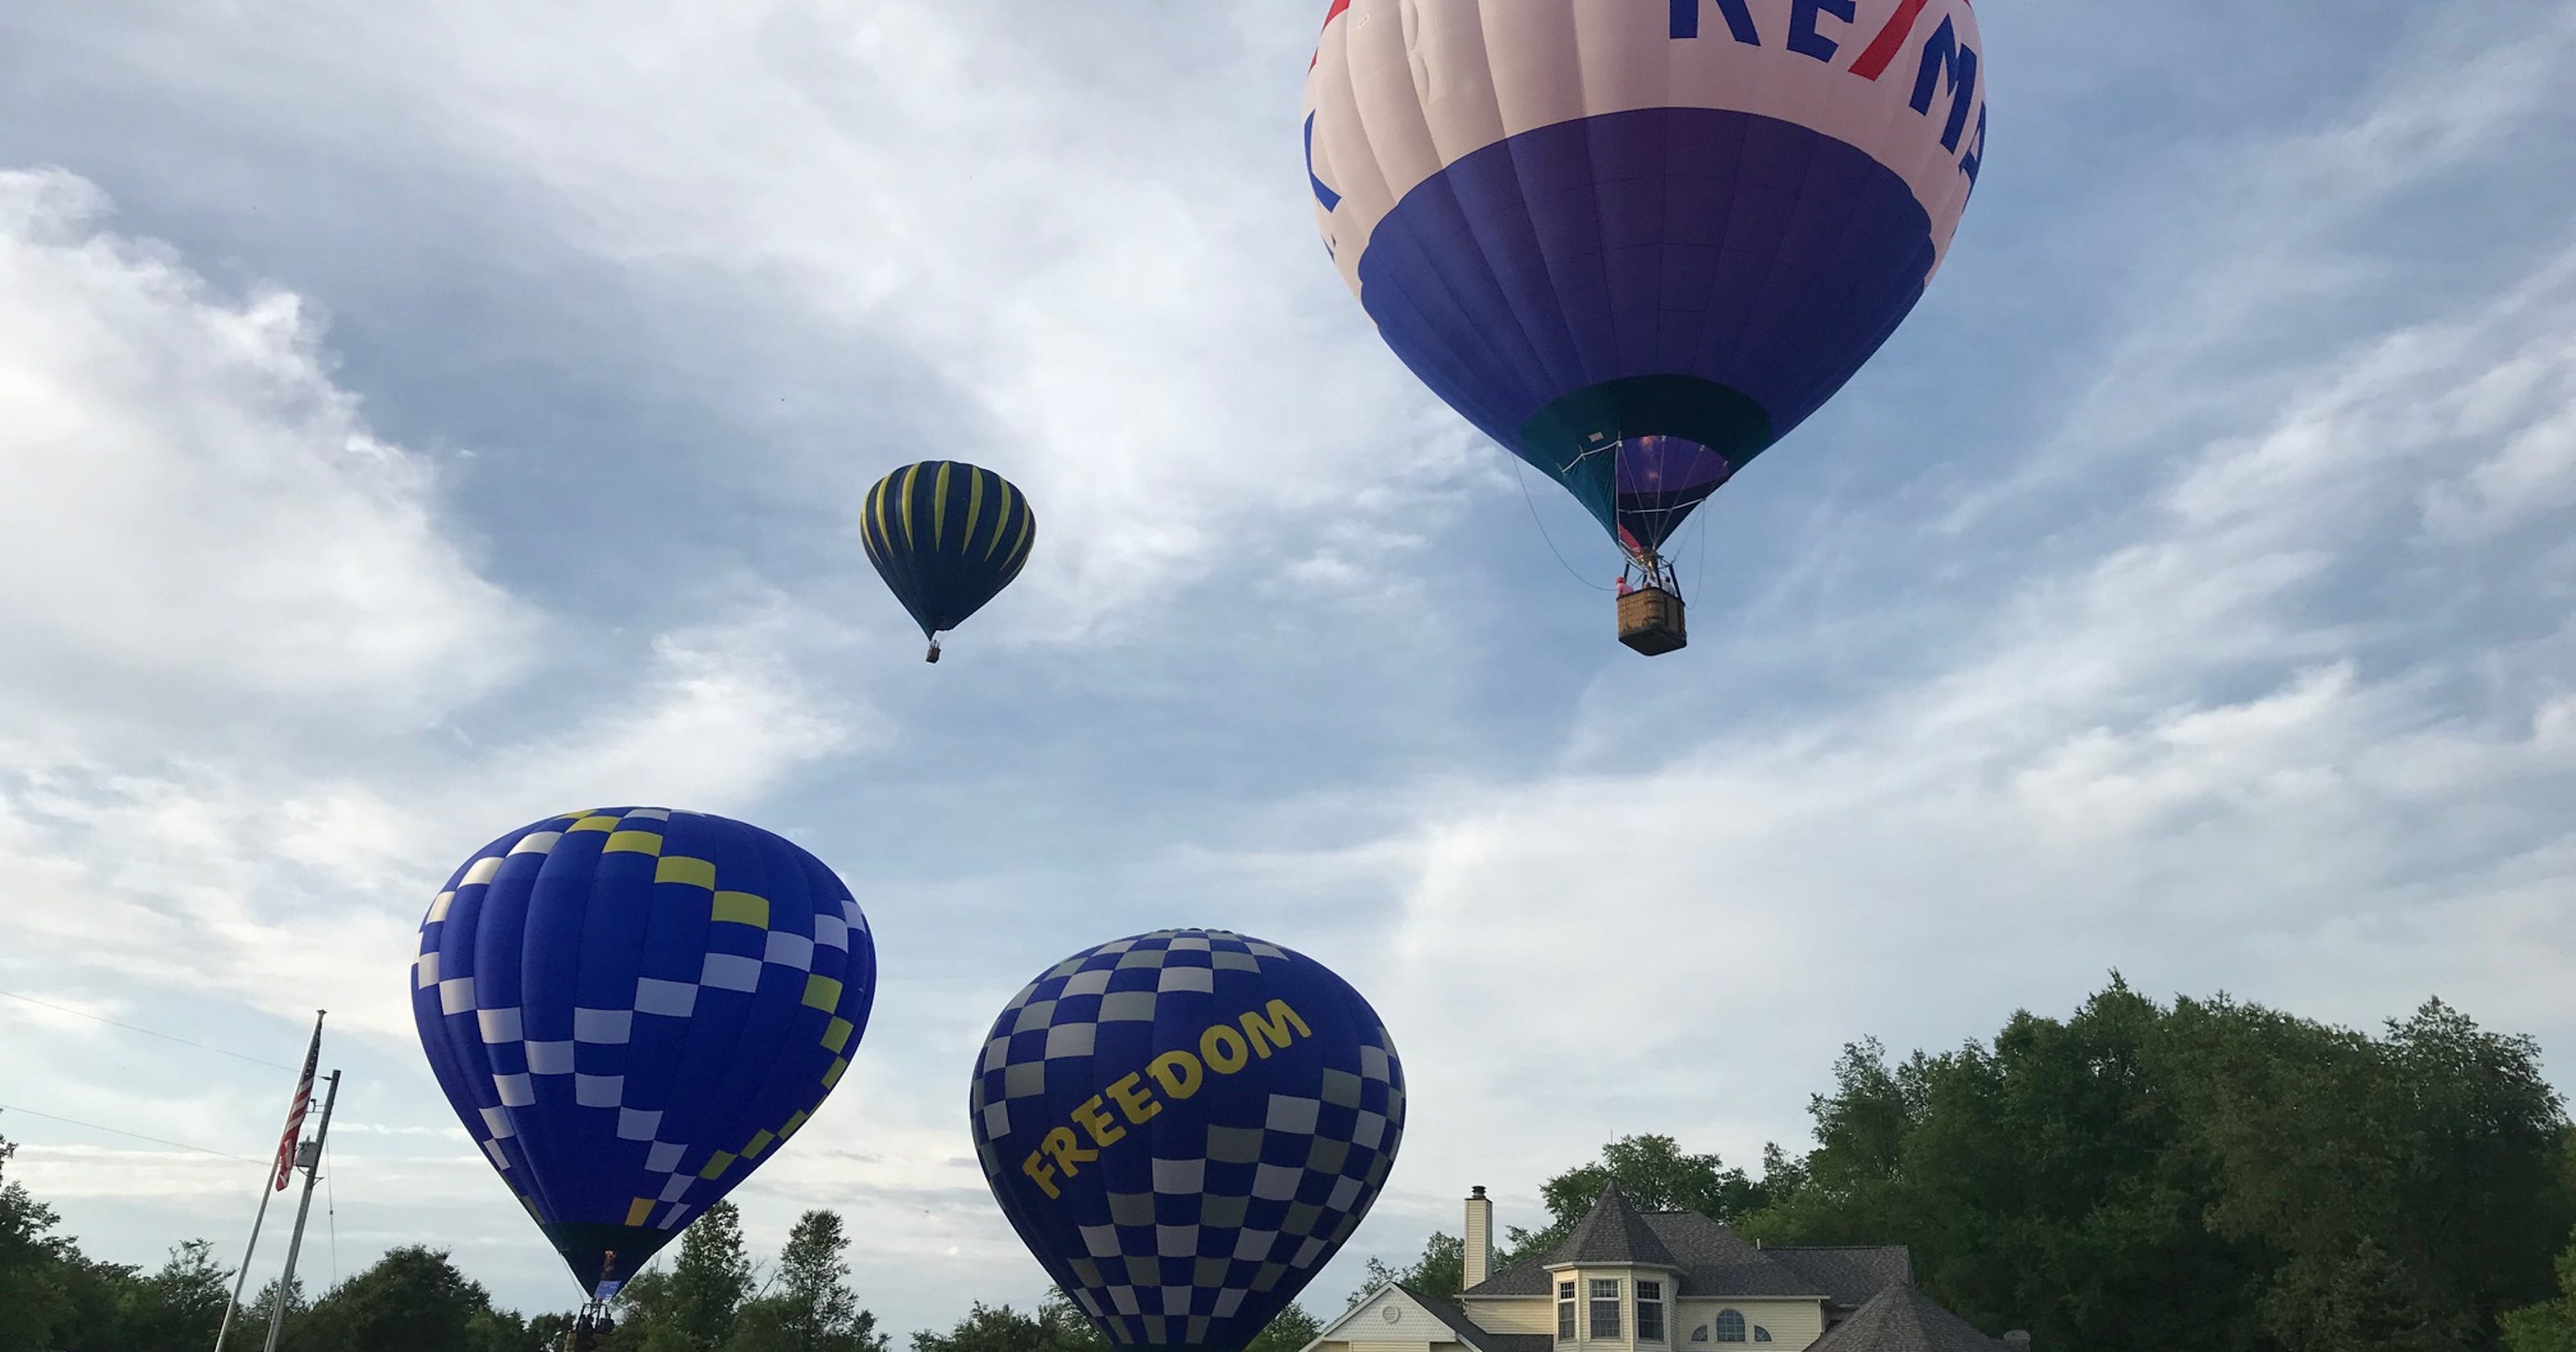 Battle Creek Field of Flight Air Show and Balloon Festival back in town